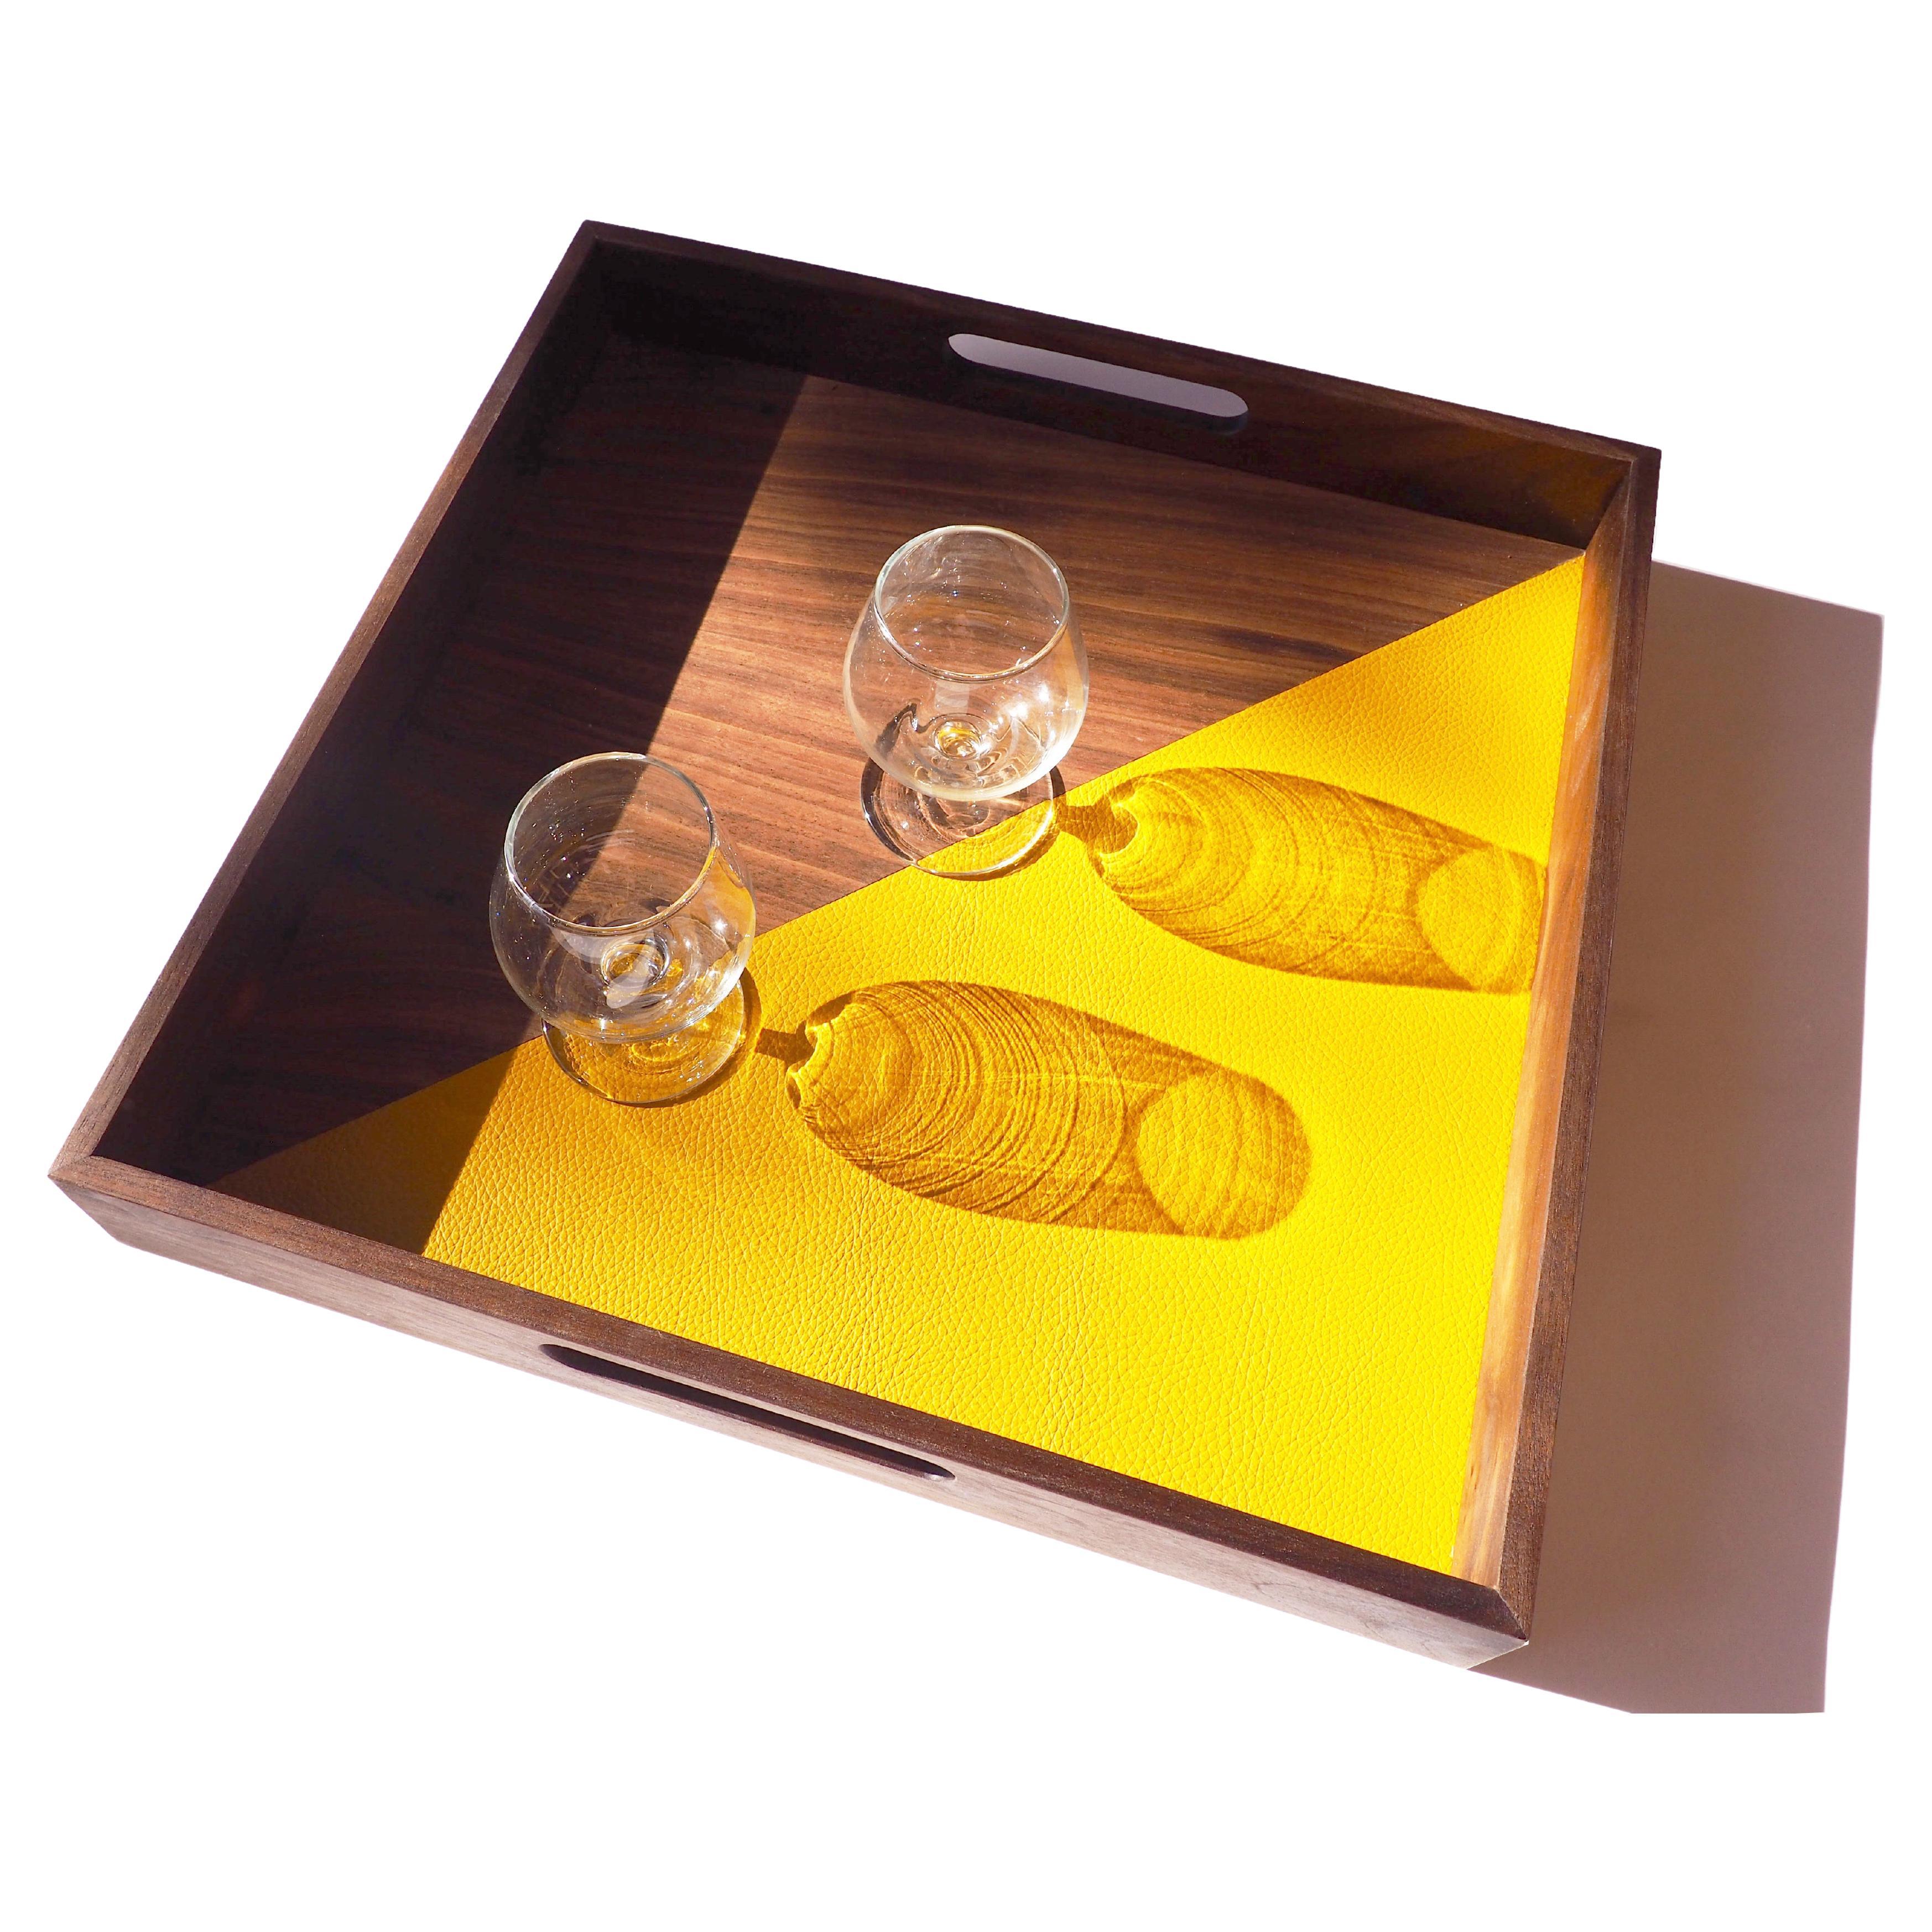 "After Hours" Contemporary square tray in walnut and leather by Atelier C.u.b For Sale